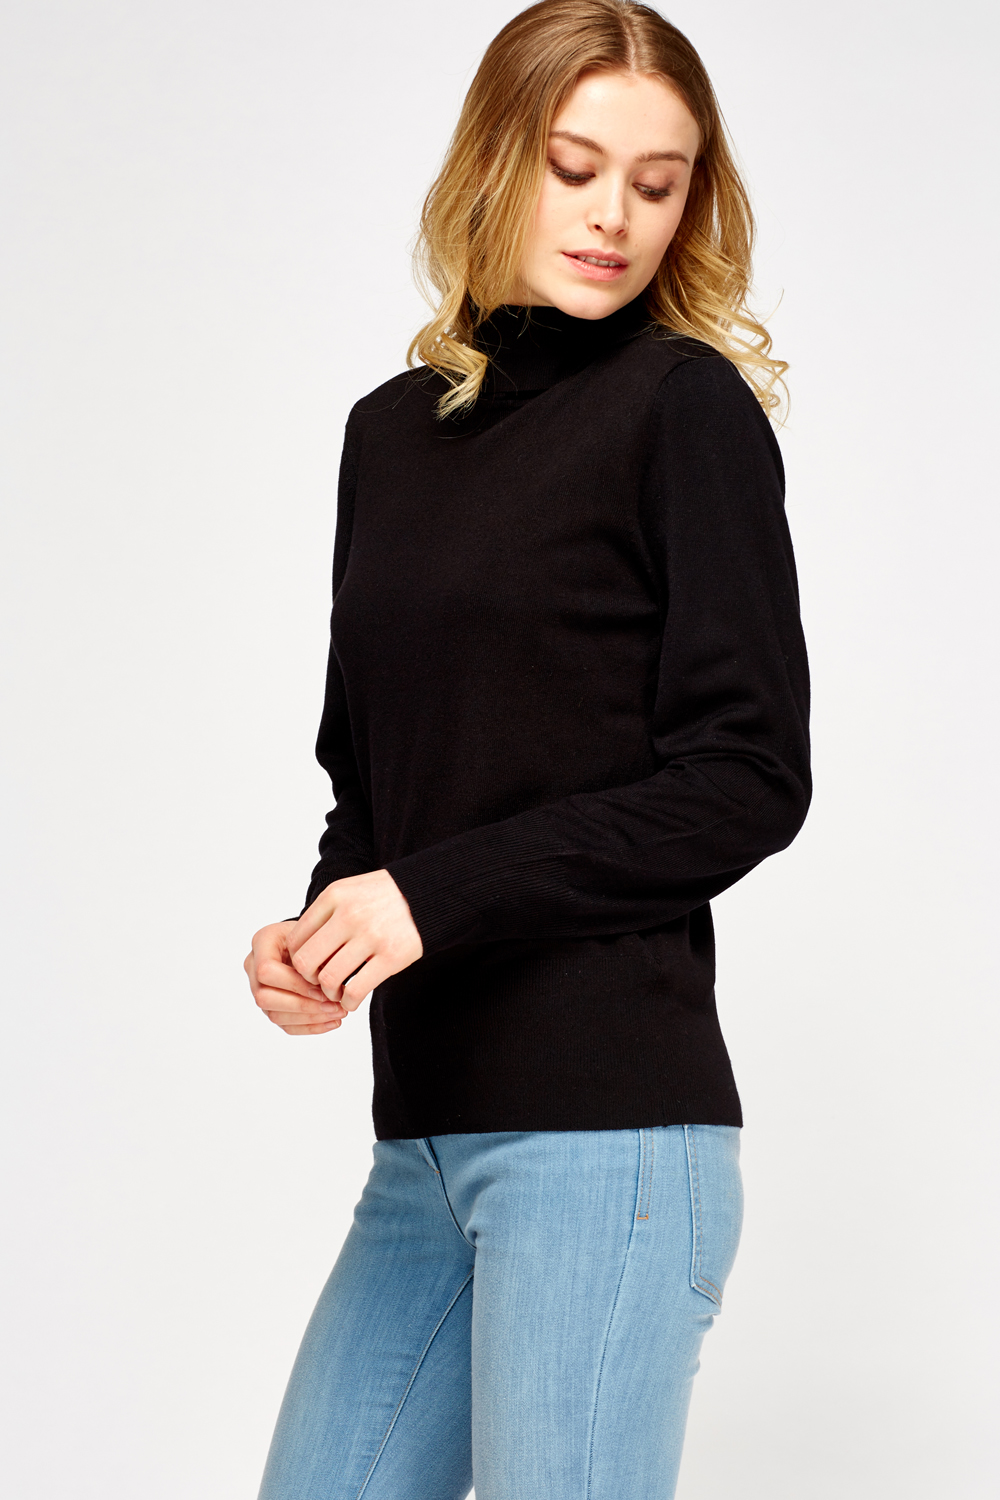 Turtle Neck Casual Jumper - Just $7